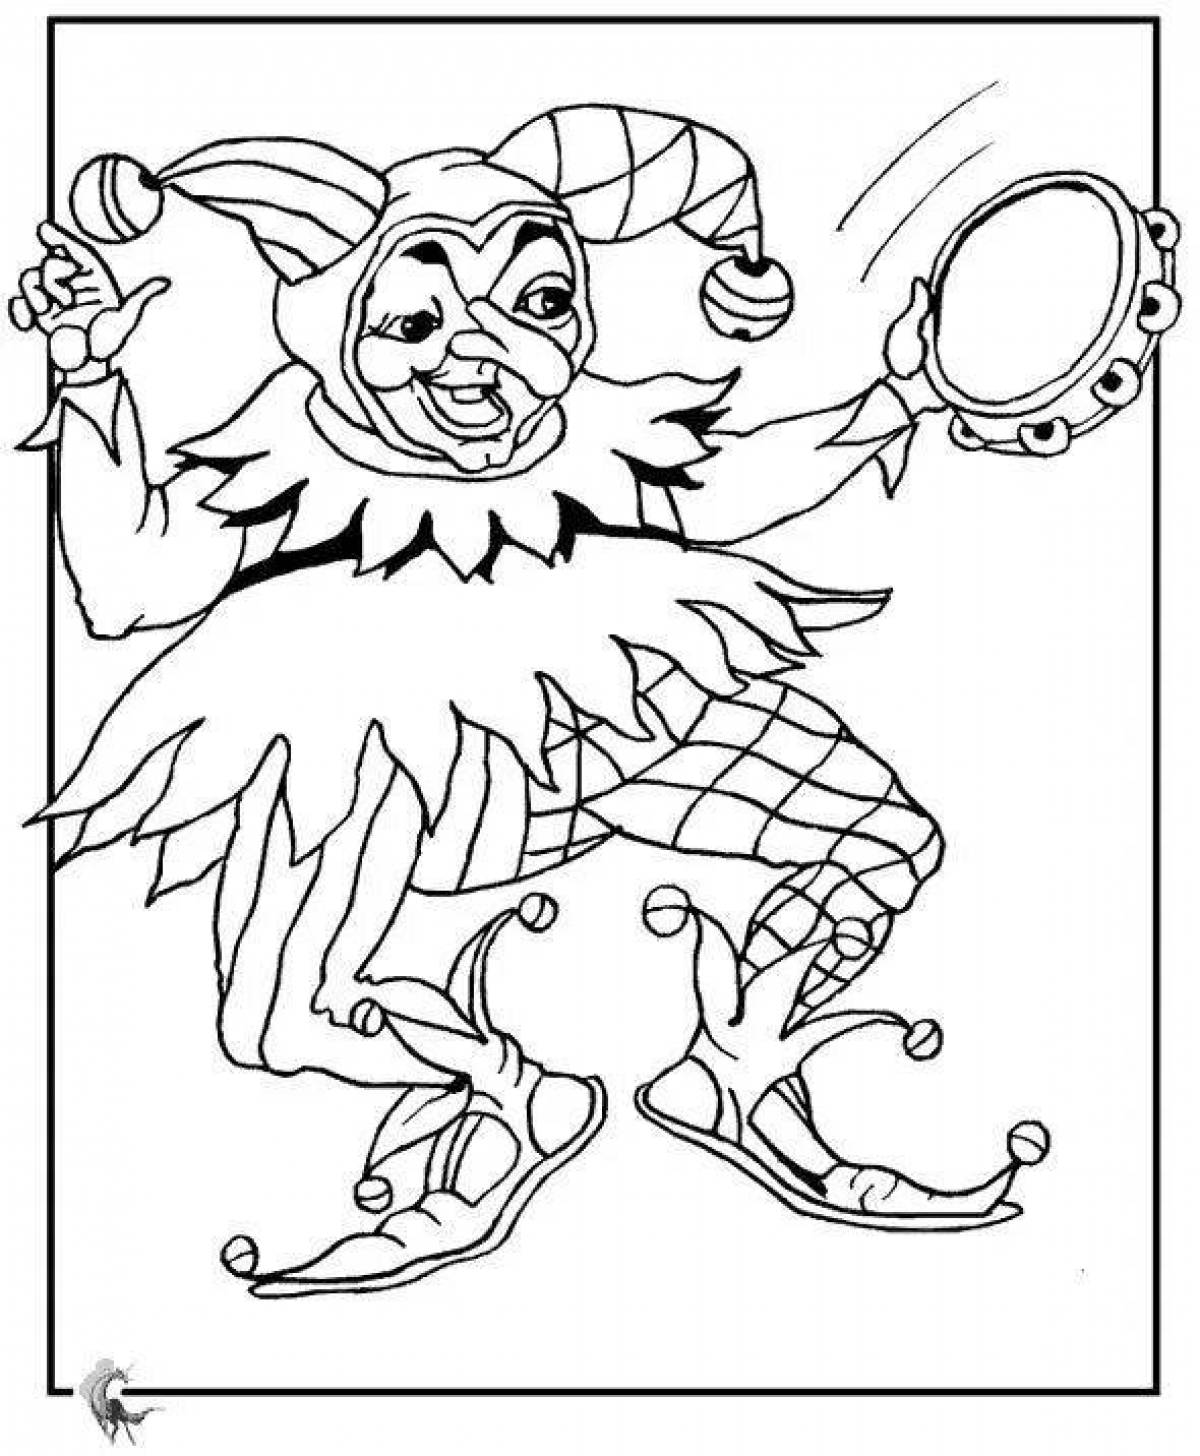 Playful jester coloring page